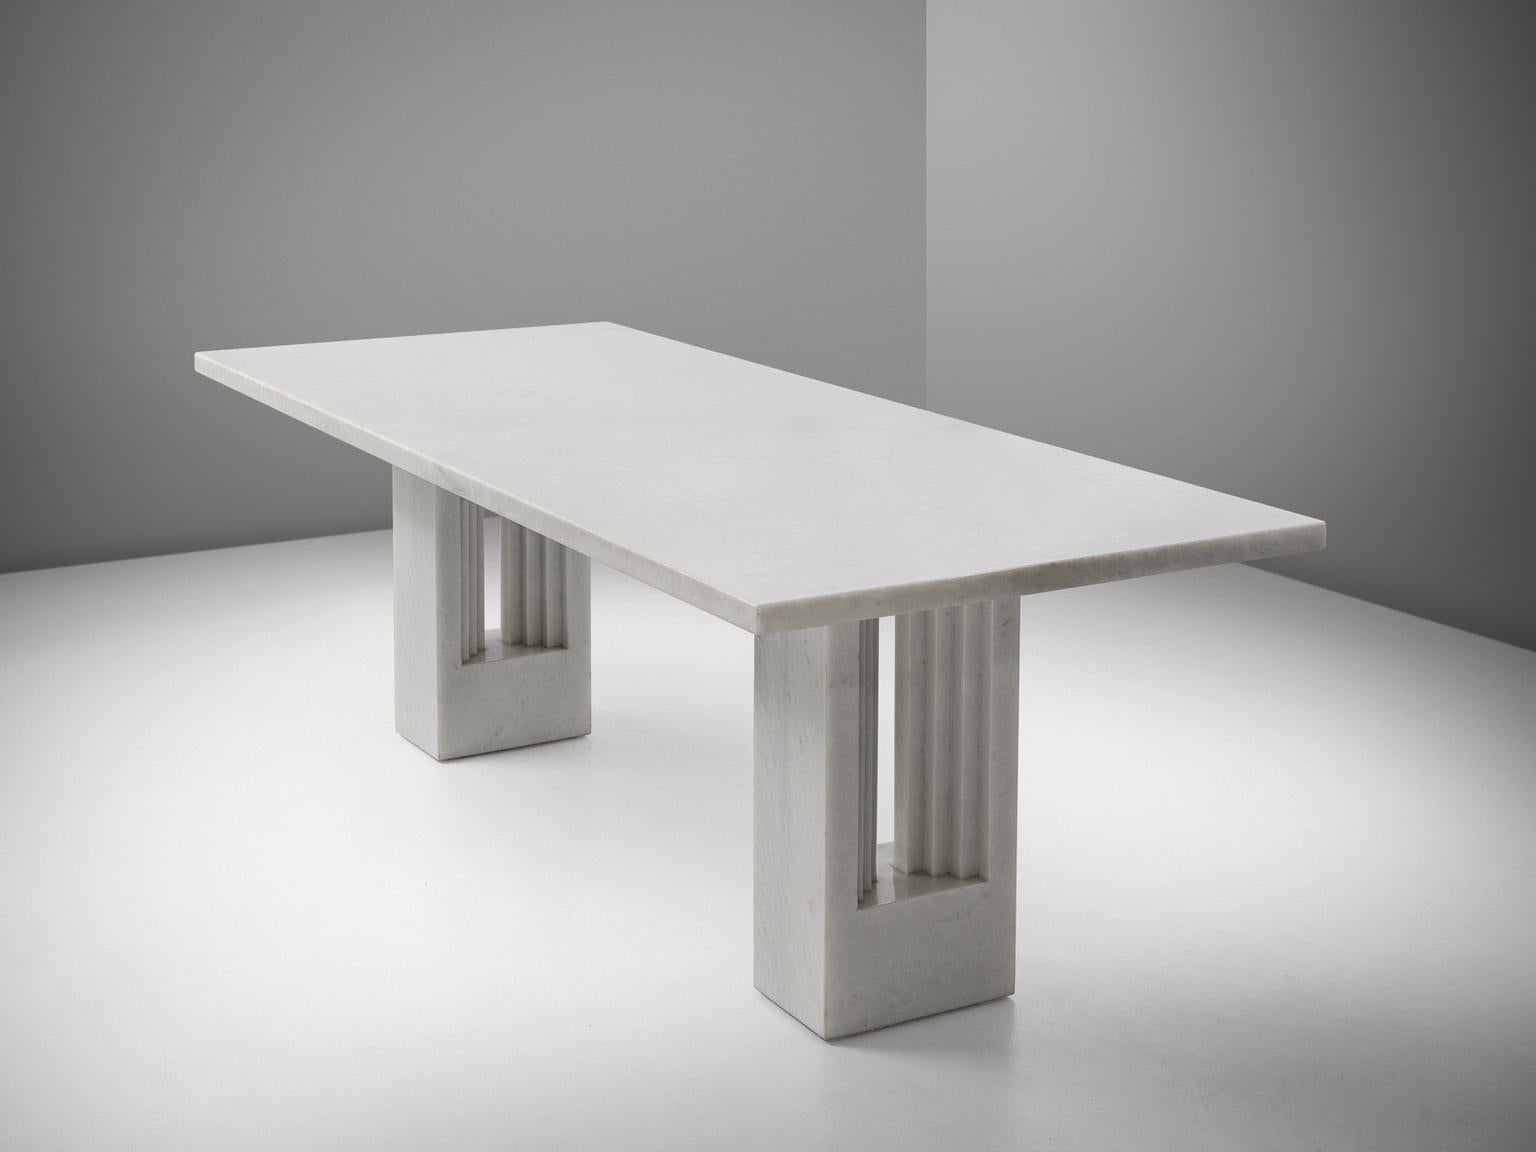 Carlo Scarpa and Marcel Breuer, dining table 'Delfi', marble, by Italy, 1970. 

Beautiful white colored marble table by Italian designer Carlo Scarpa. This center table is very stately. The legs with gradual lines remind of classical roman columns